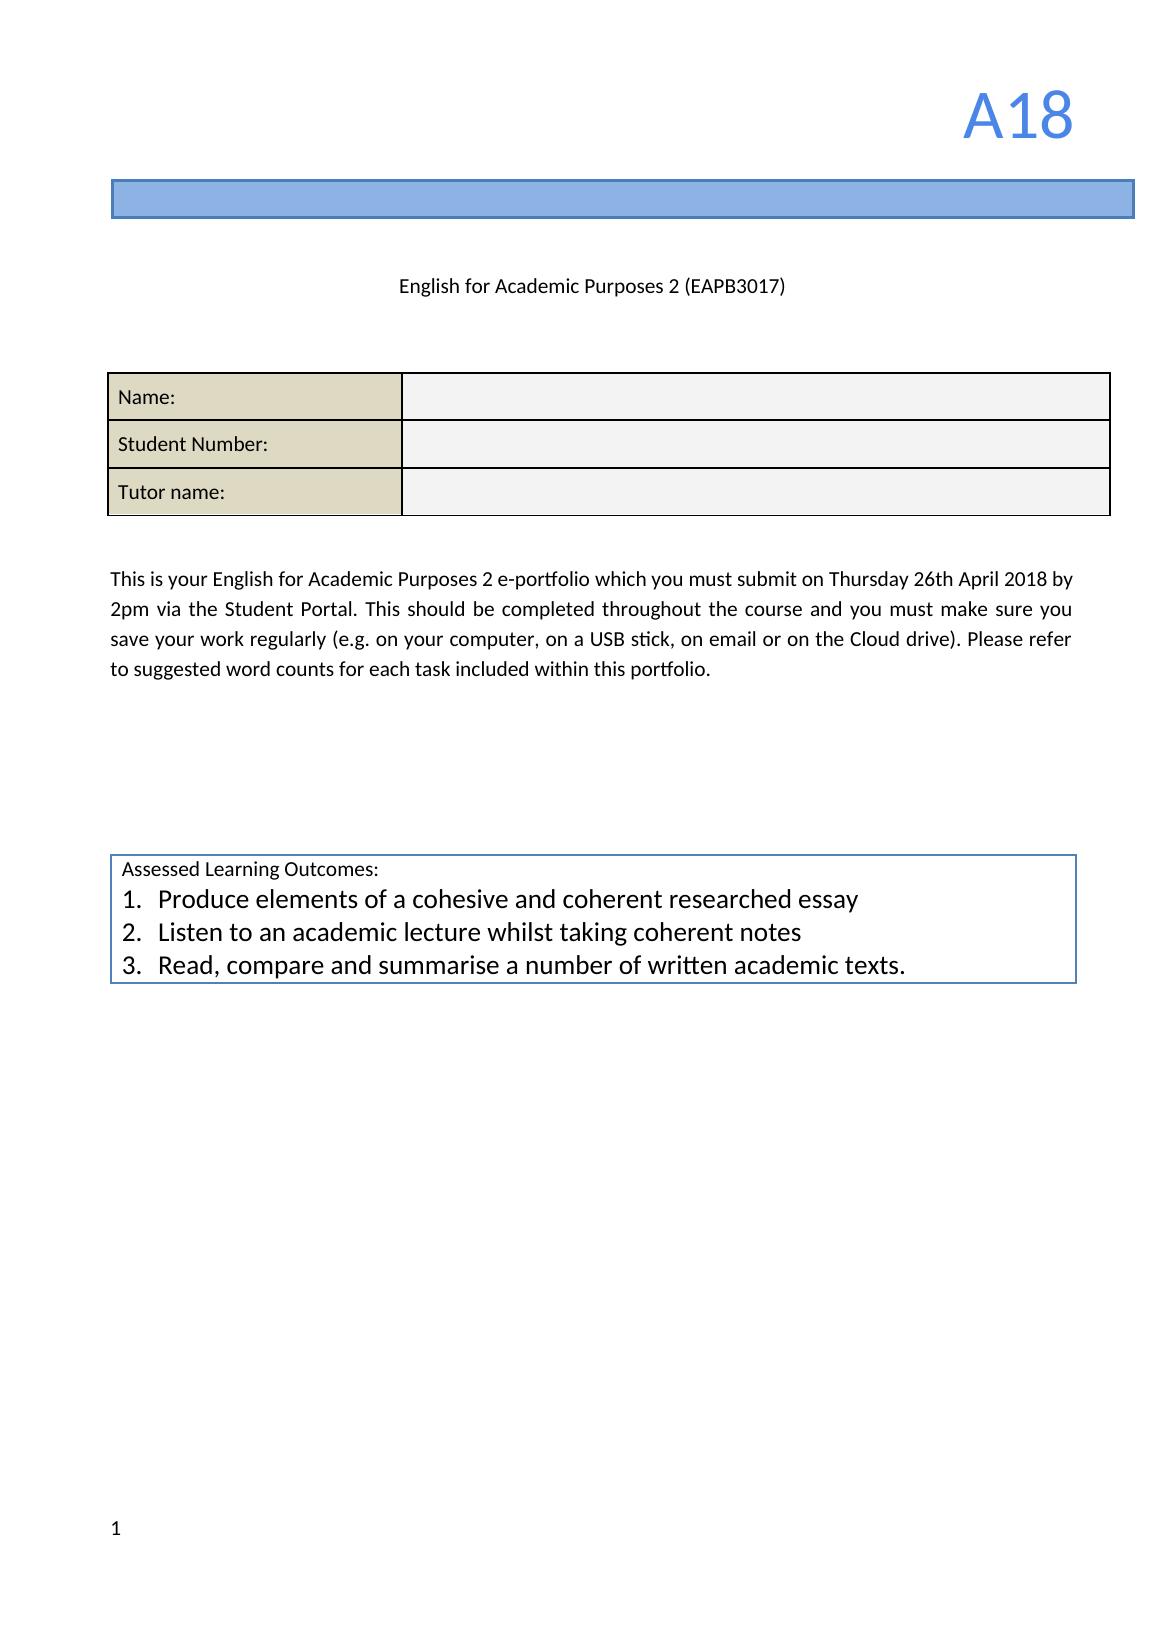 English for Academic Purposes  Assignment PDF_1